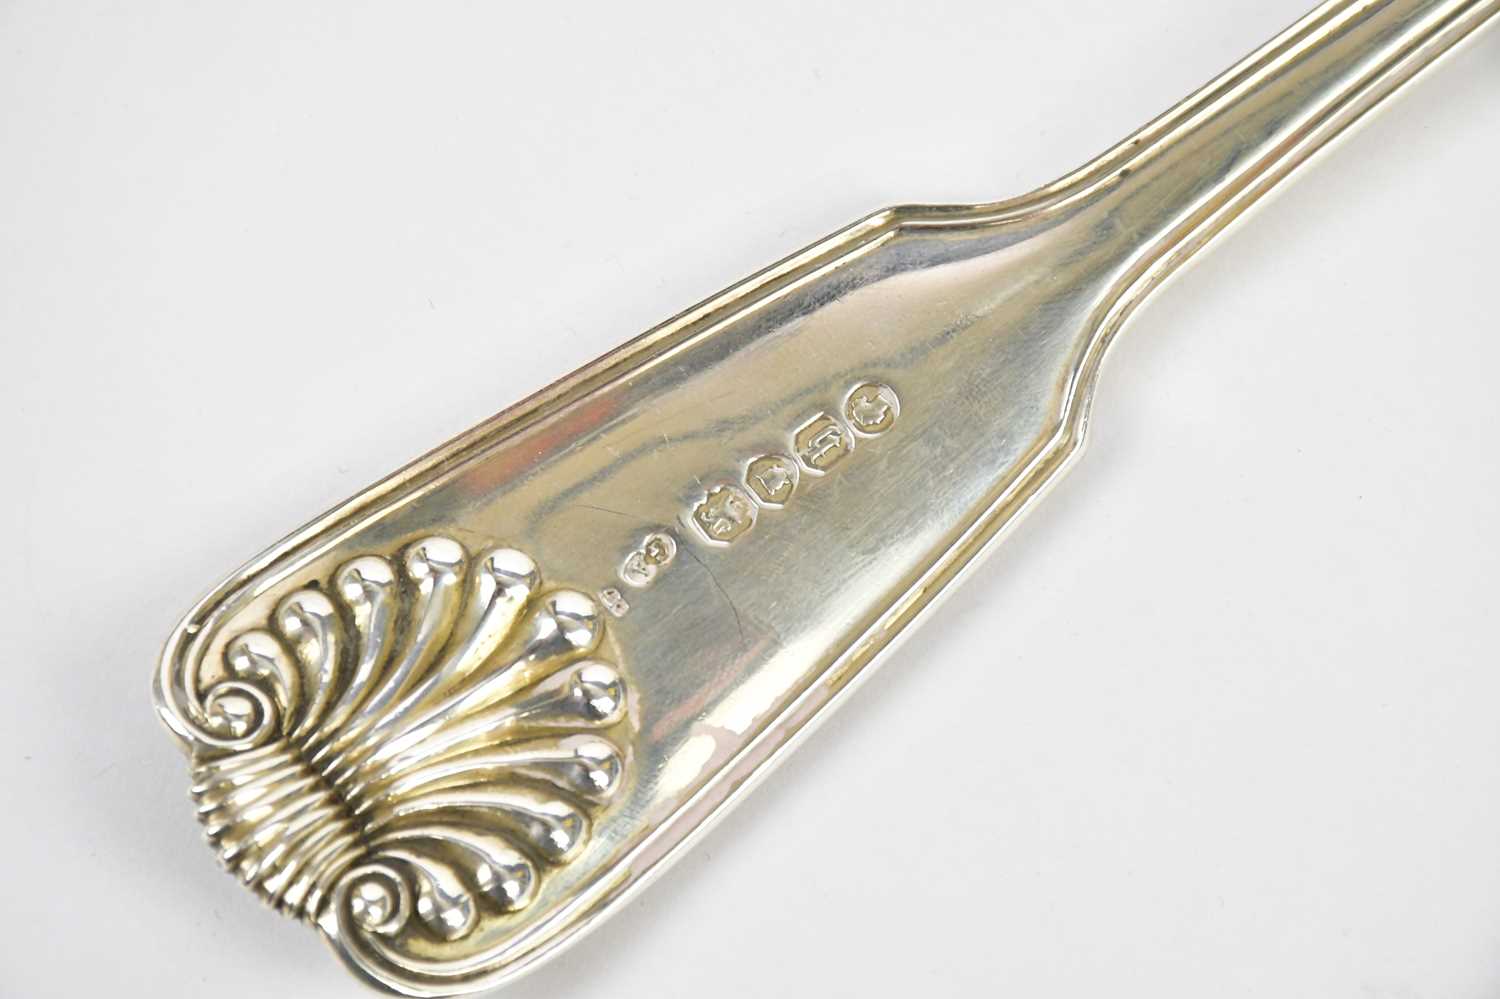 CHAWNER & CO; a Victorian hallmarked silver basting spoon, London 1863, approx weight 7.07ozt/220g. - Image 3 of 5